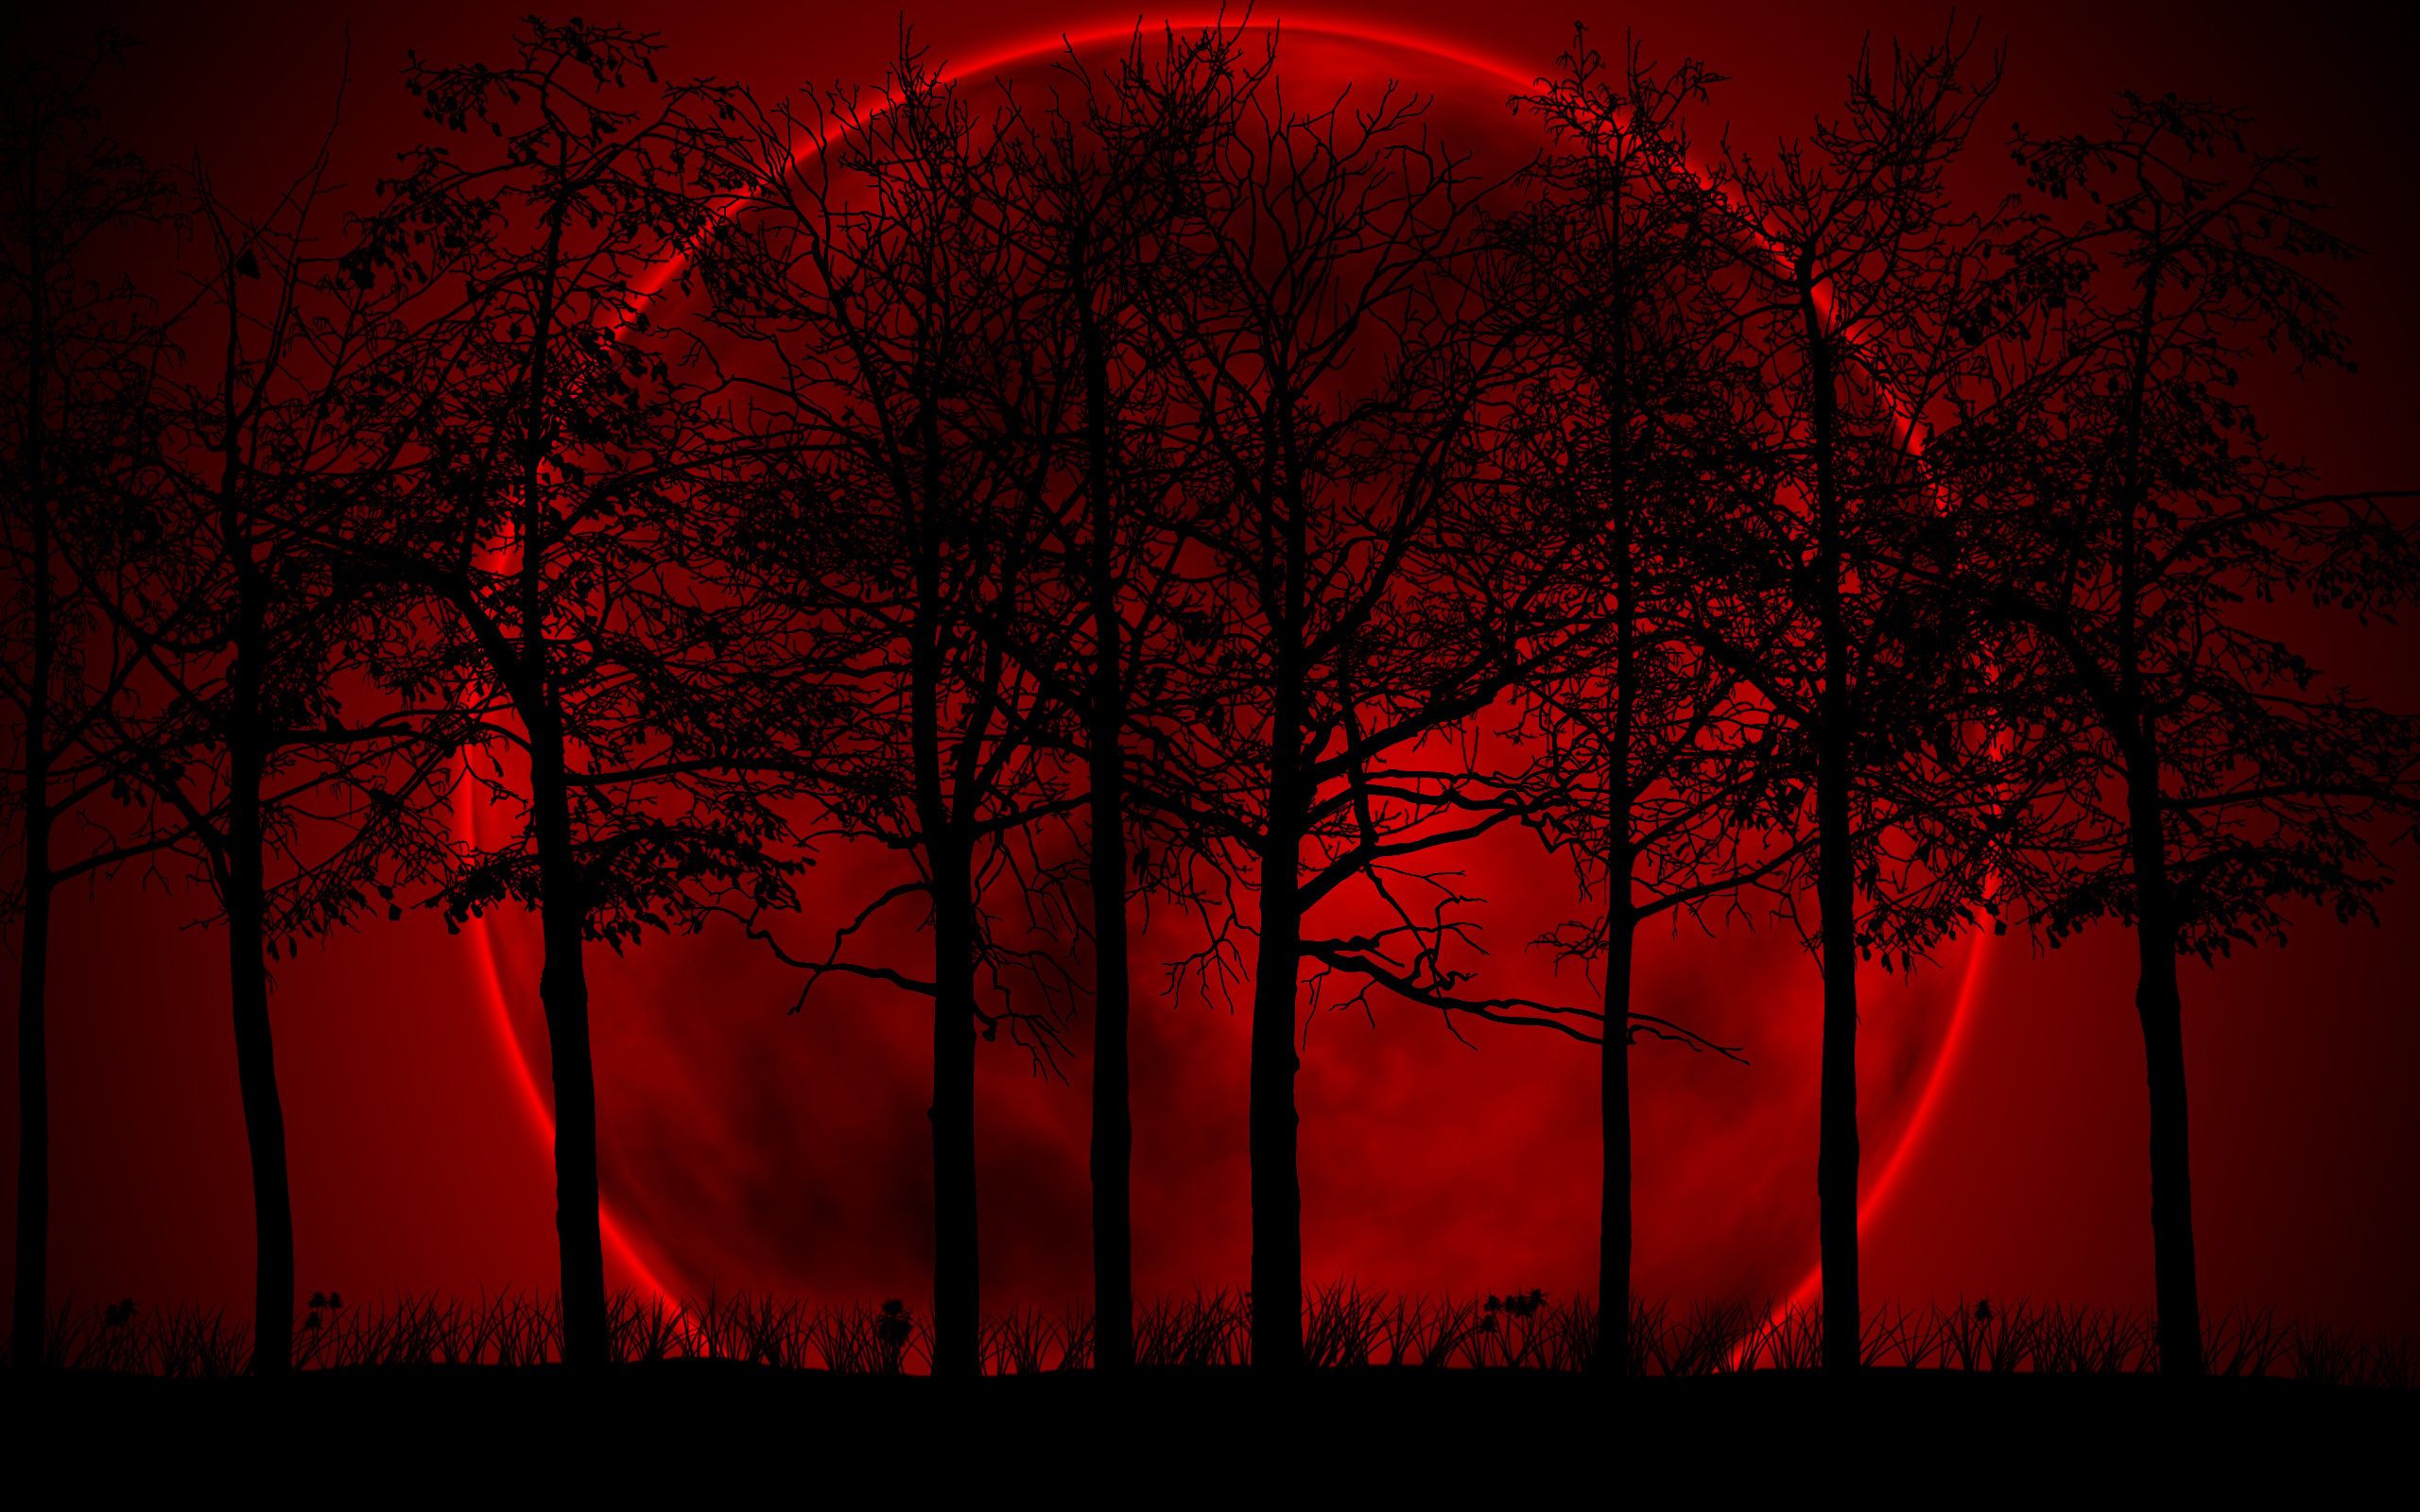 A red moon with trees in the foreground - Blood